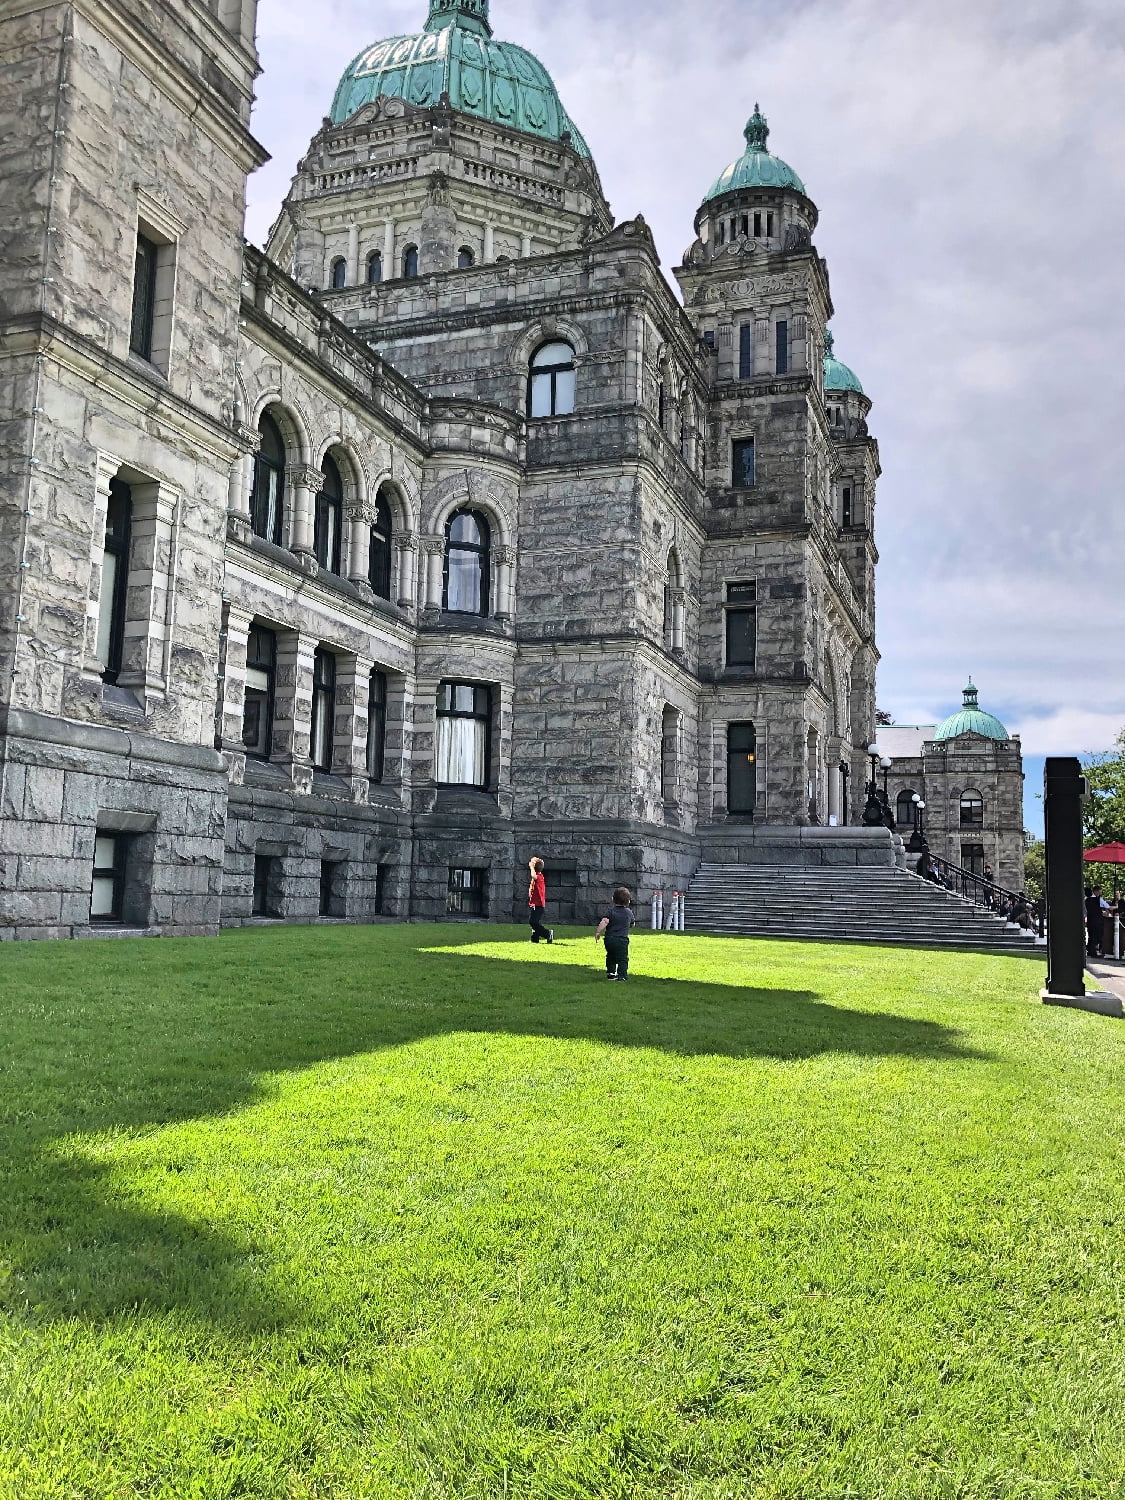 BC Legislative Assembly Lawn with Kids Playing